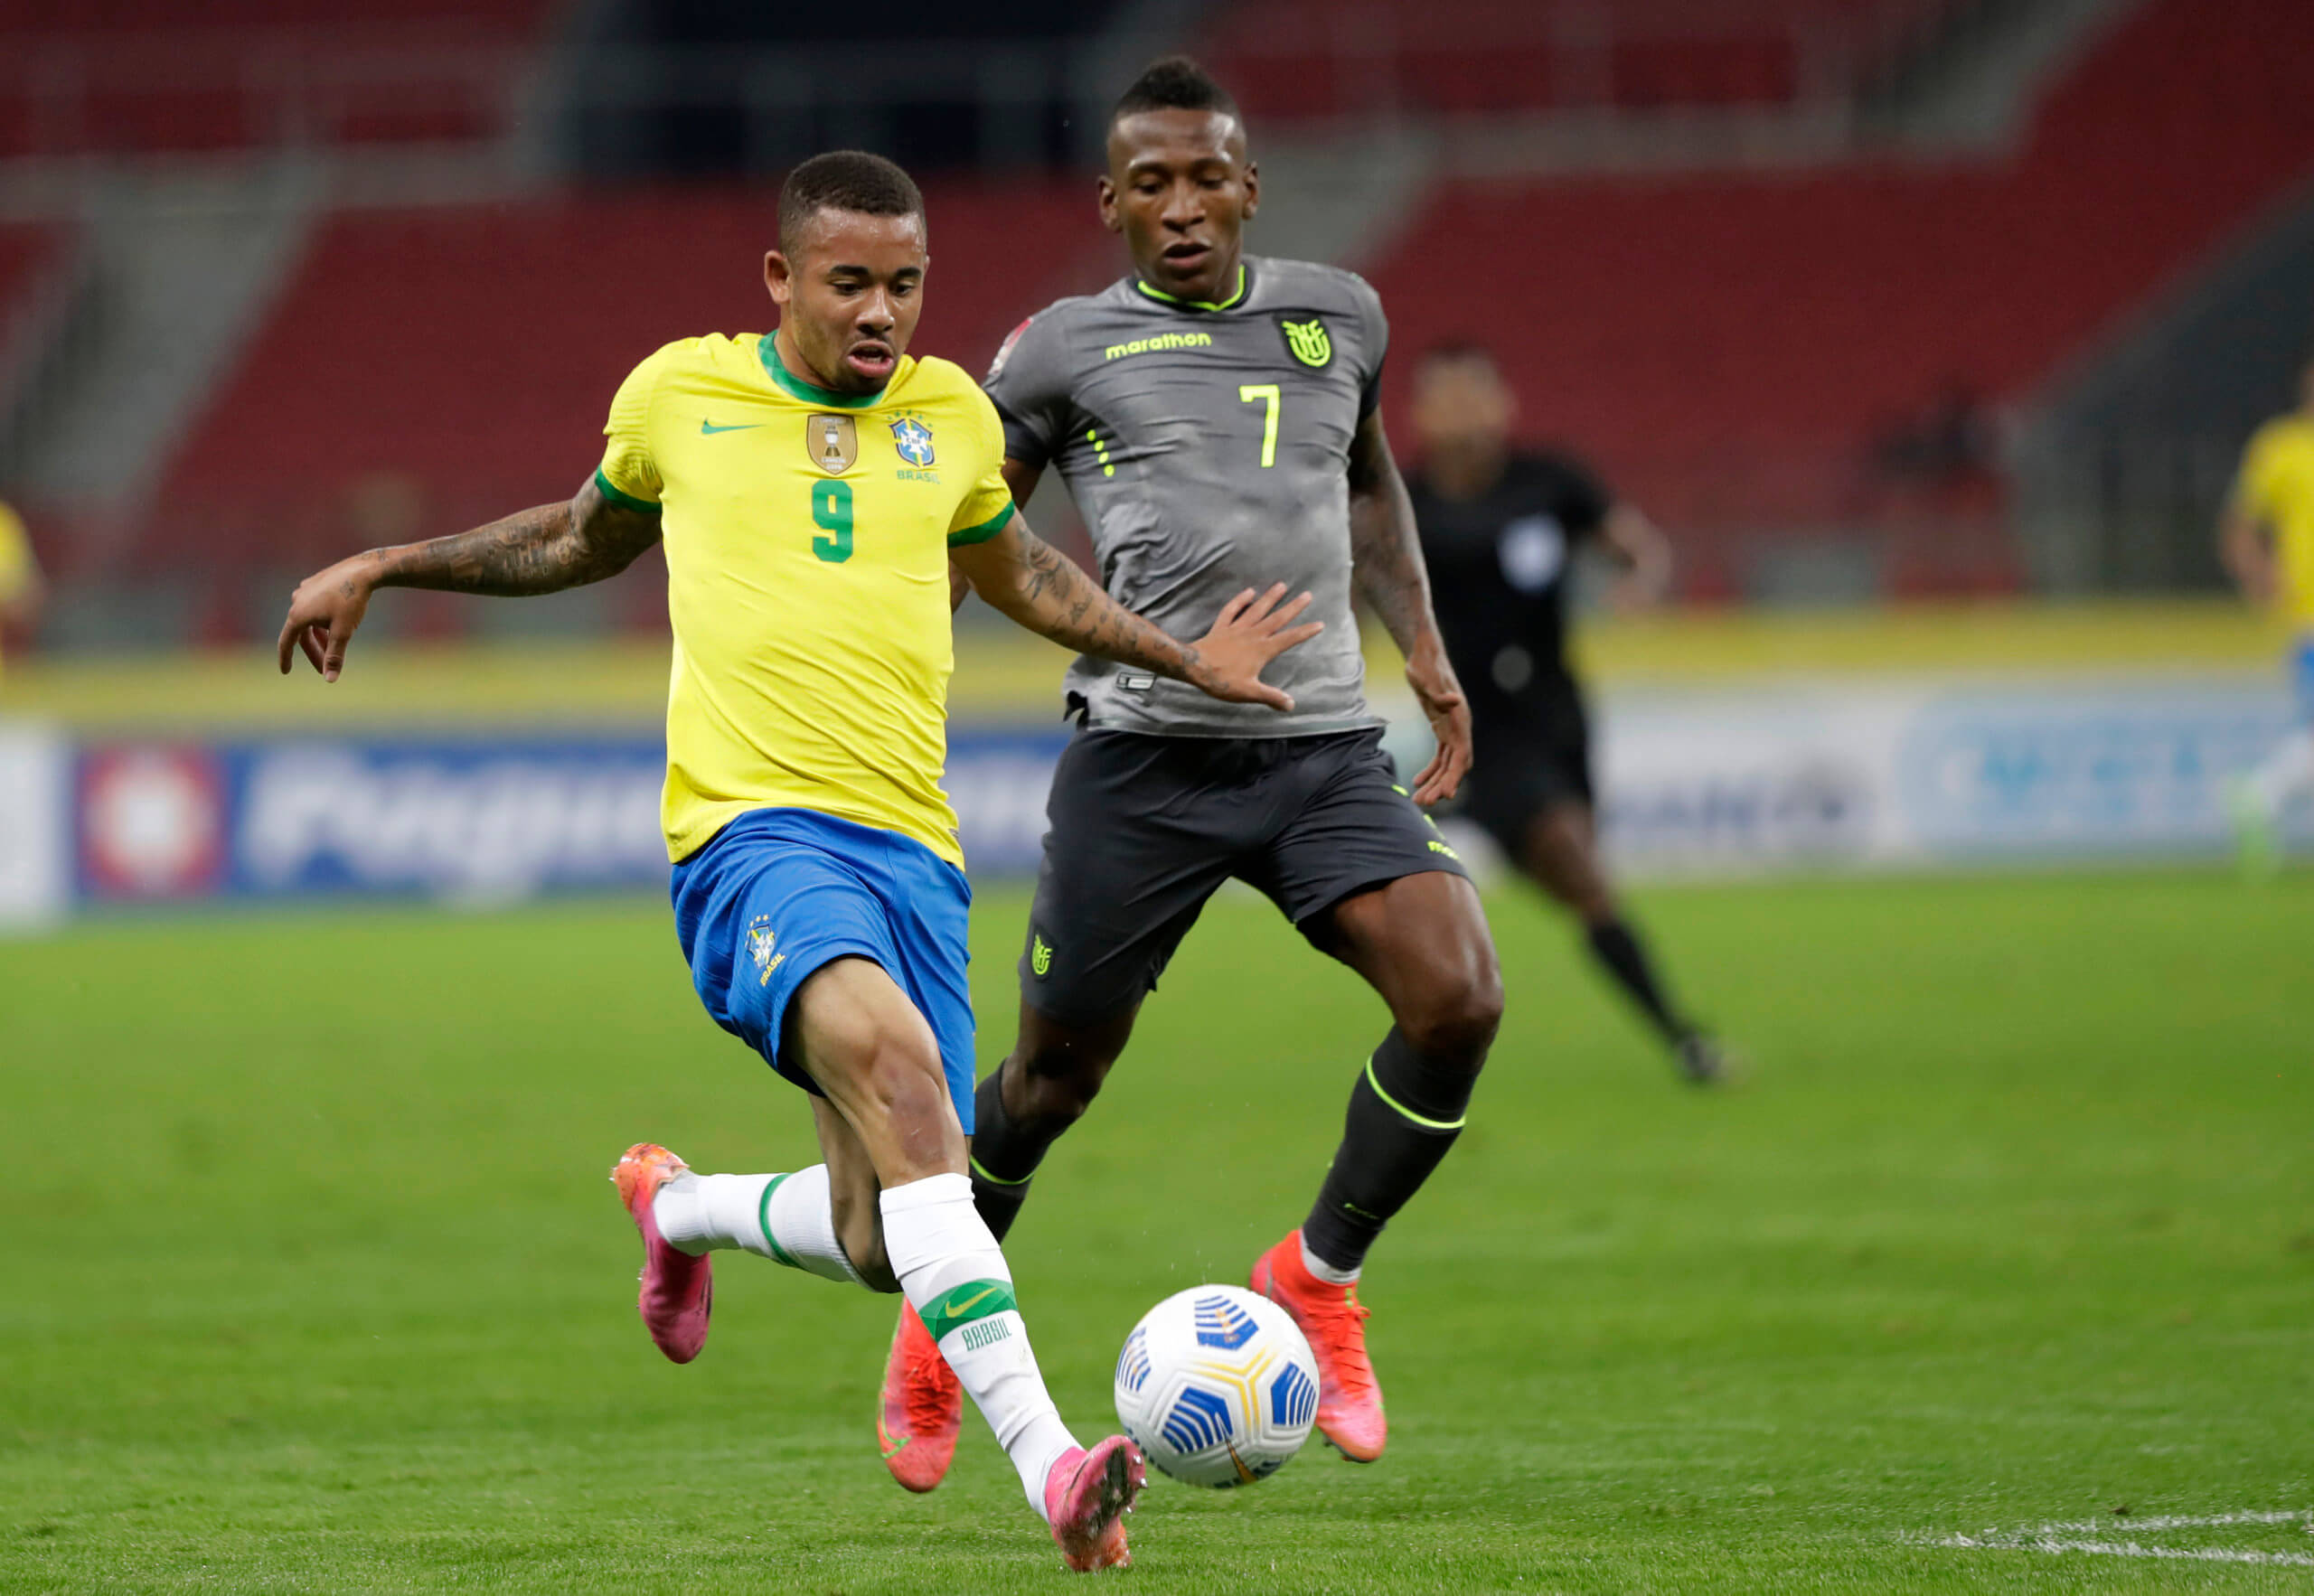 2022 World Cup Group G preview, teams, odds: Brazil the favorites